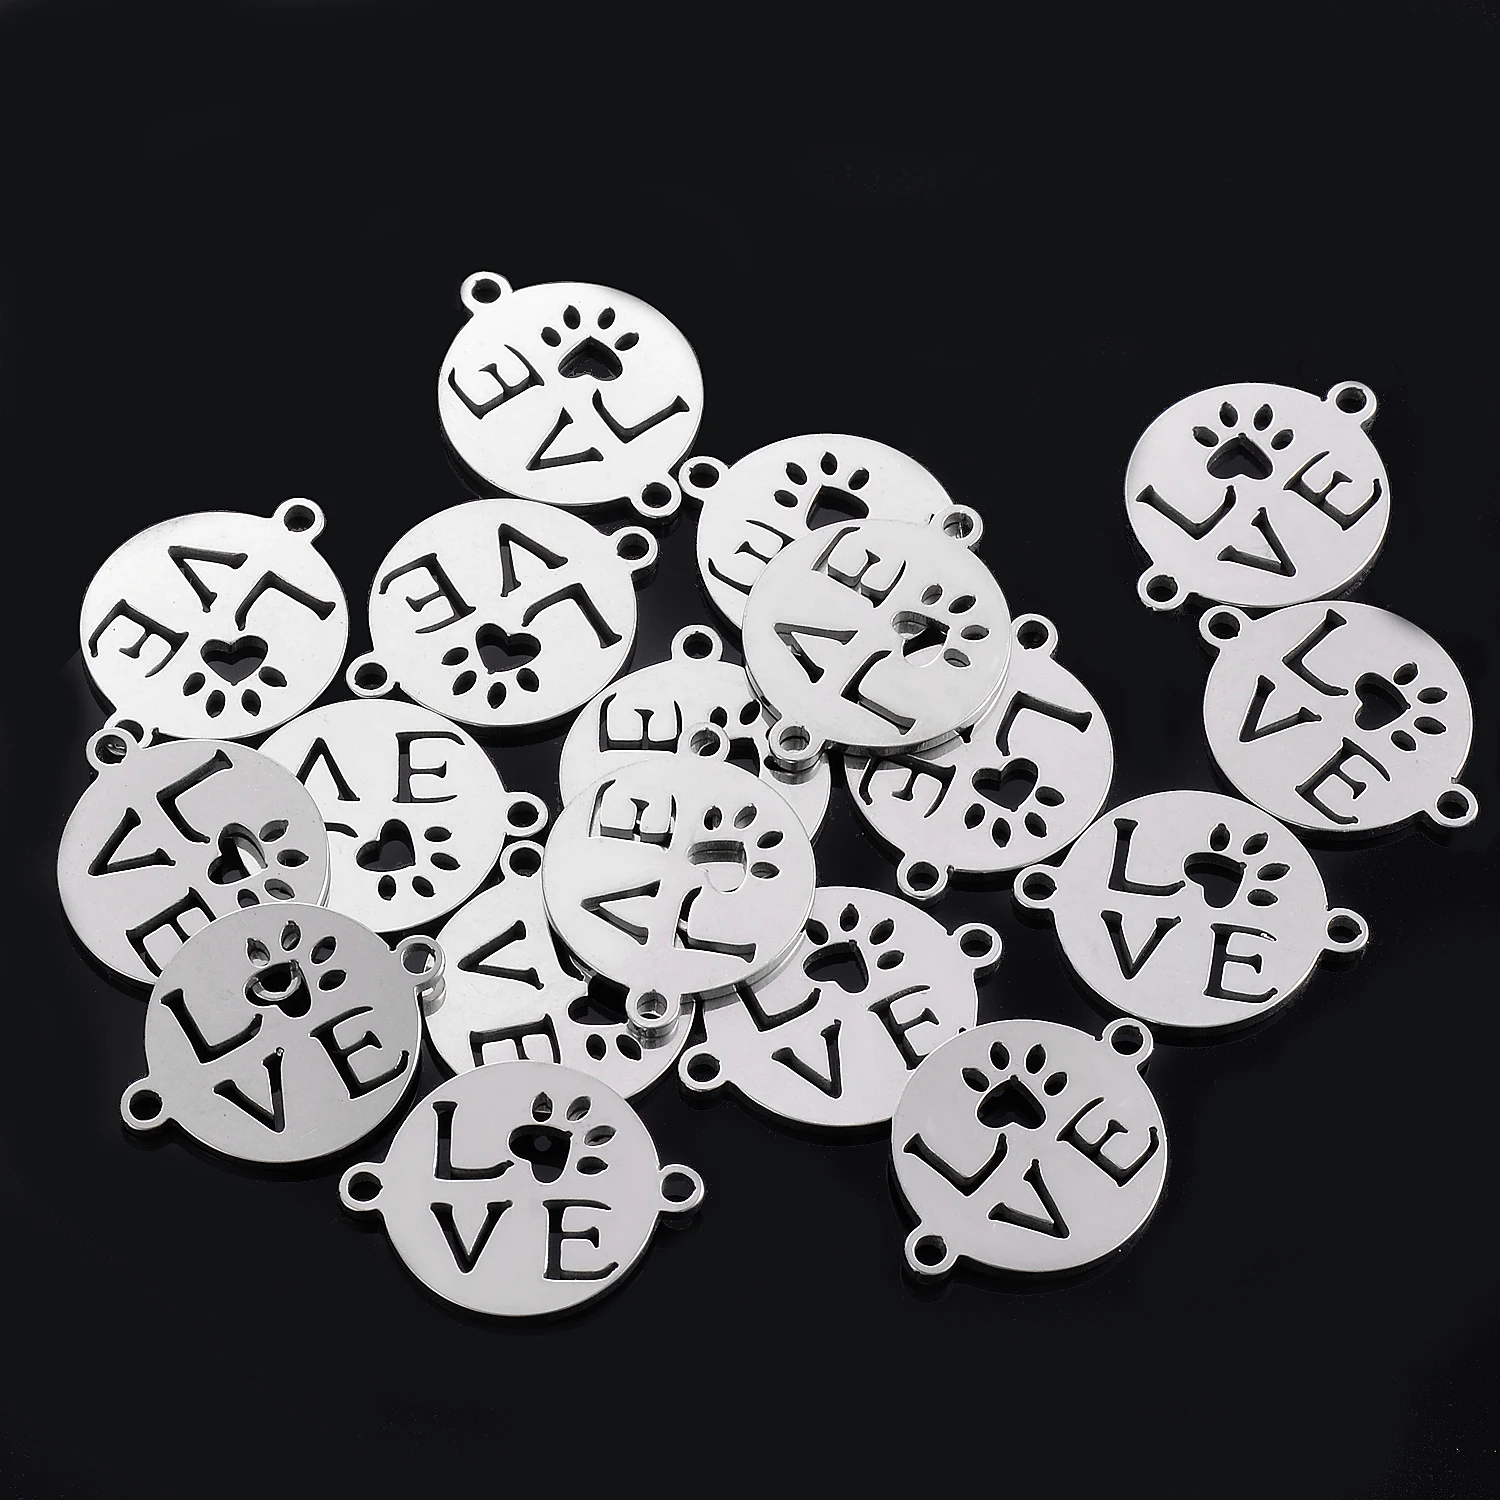 

10 pcs Stainless Steel Small Love Bracelet Charms Round Paw Jewelry Findings Bangle Connector Accessory 2 Holes DIY Charm